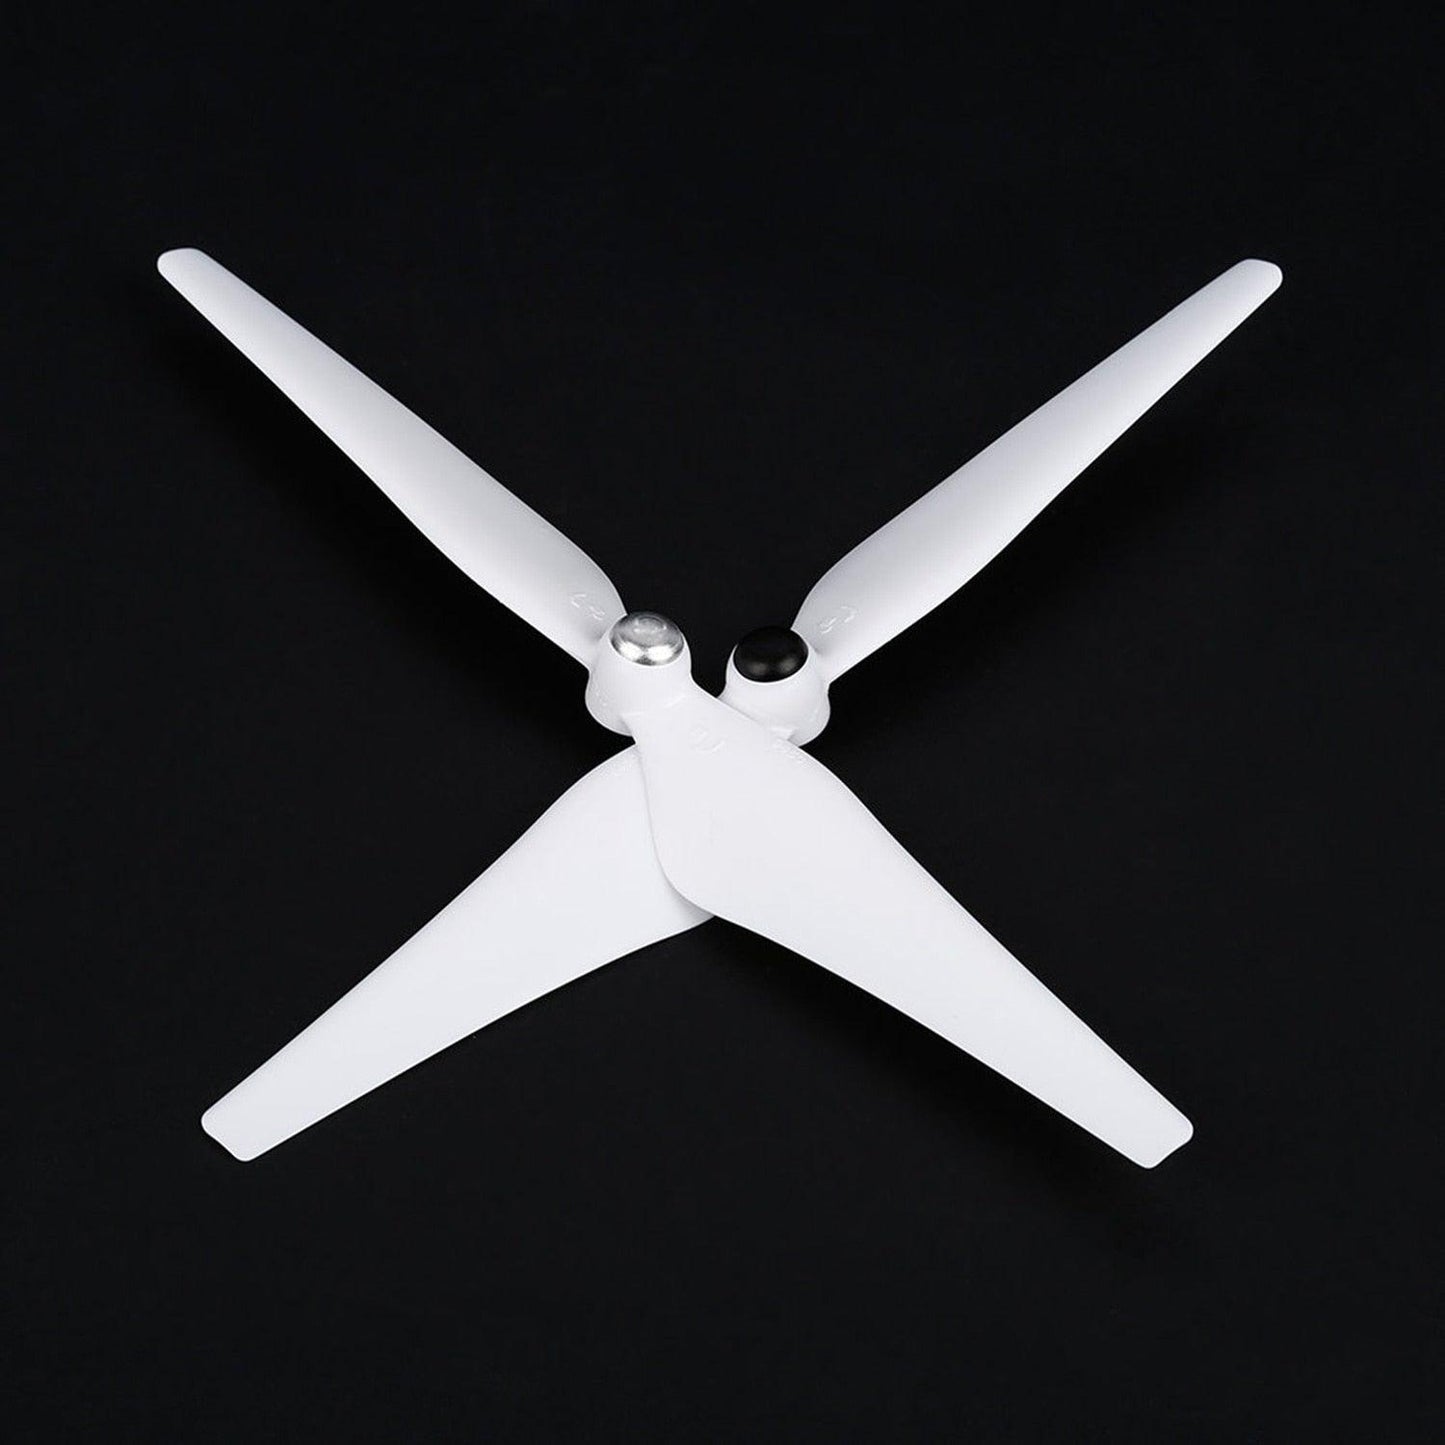 8pcs 9450 Propeller for DJI Phantom 3 2 Drone Self-Tightening Props Replacement Blade Screw Spare Parts Wing Fan Accessory - RCDrone